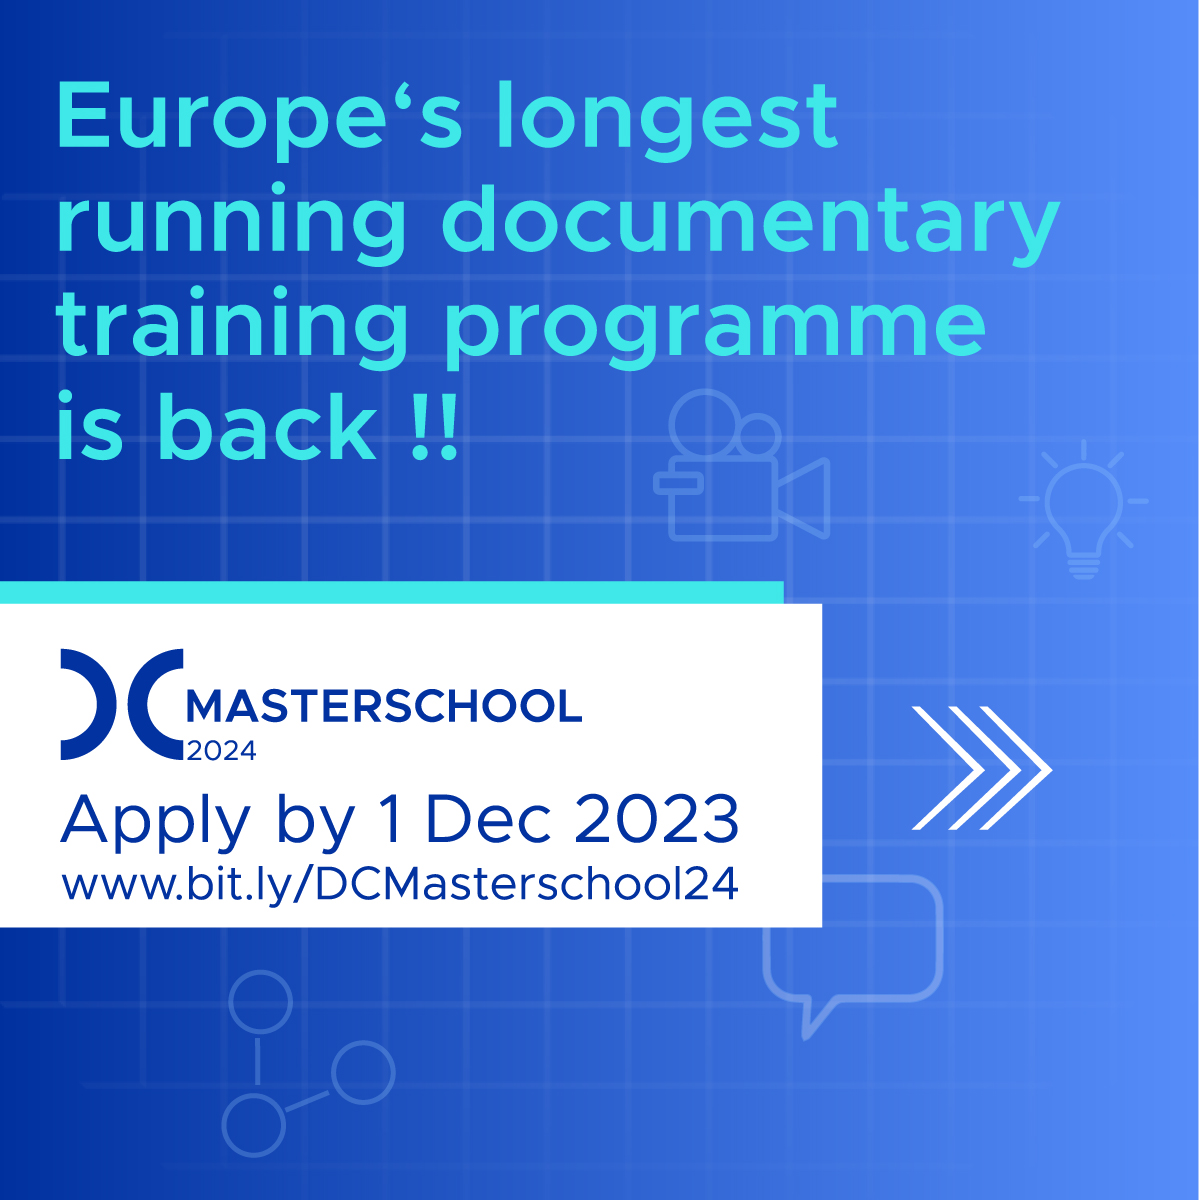 Galvaniser. World Changer. Filmmaker. You. Europe’s premier documentary training programme is back for the 24th year! Join Masterschool for 10 months of unique mentorship to allow your documentary in development to inspire the world. Apply by 1 Dec >> bit.ly/DCMasterschool…